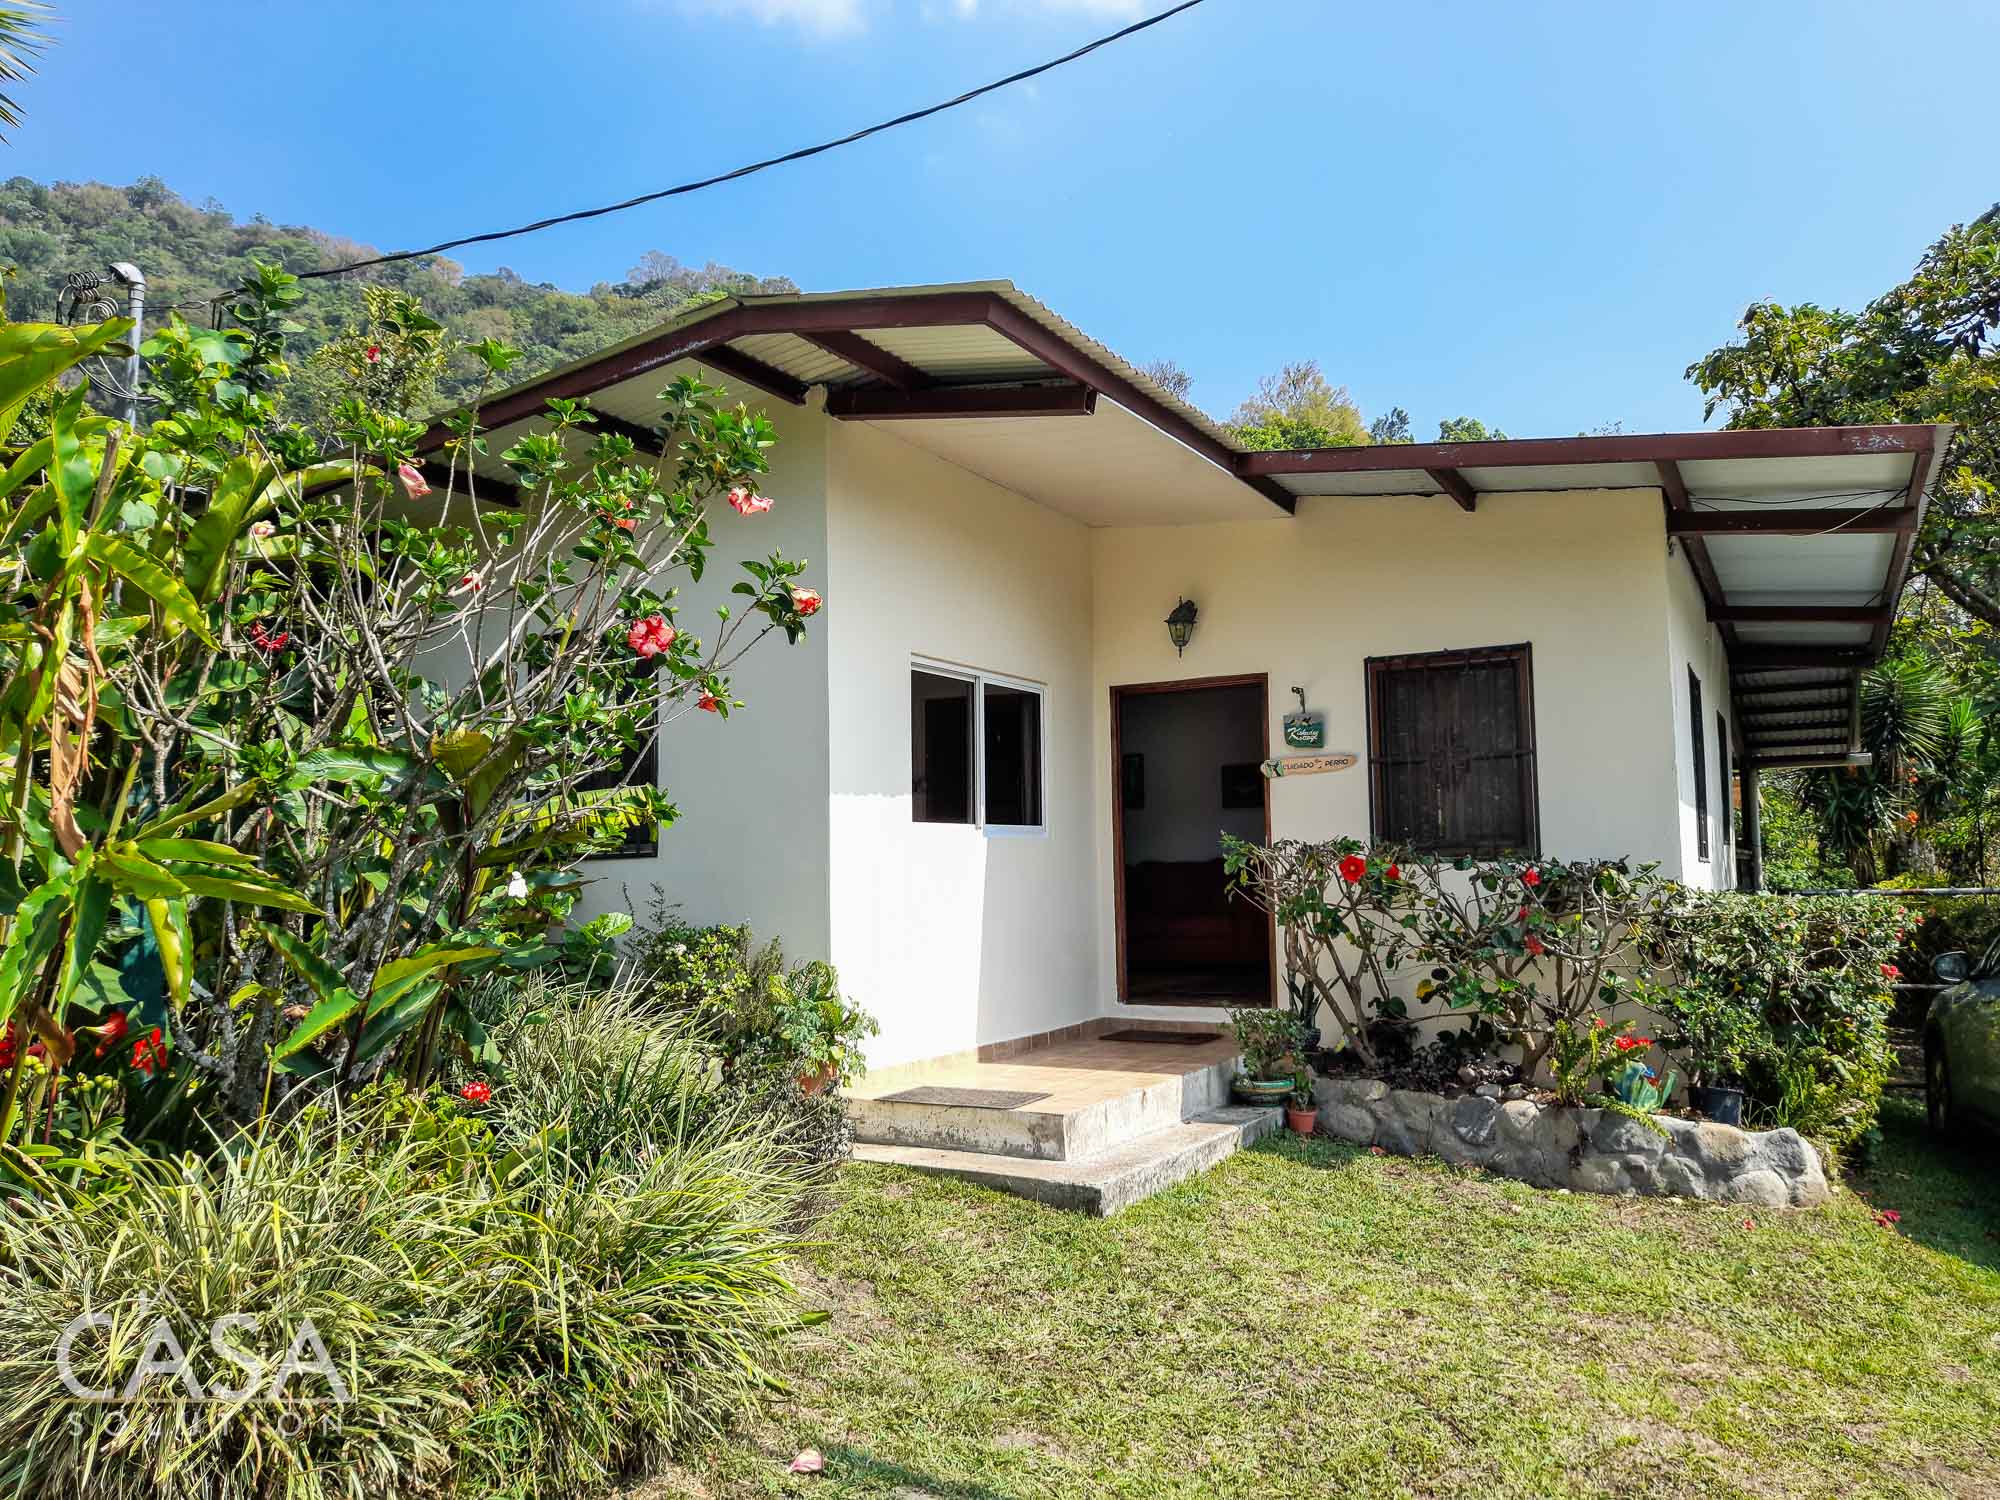 Inviting and Affordable Boquete Casita nestled amidst mountains for Sale in Alto Lino. With terrace views near Downtown Boquete